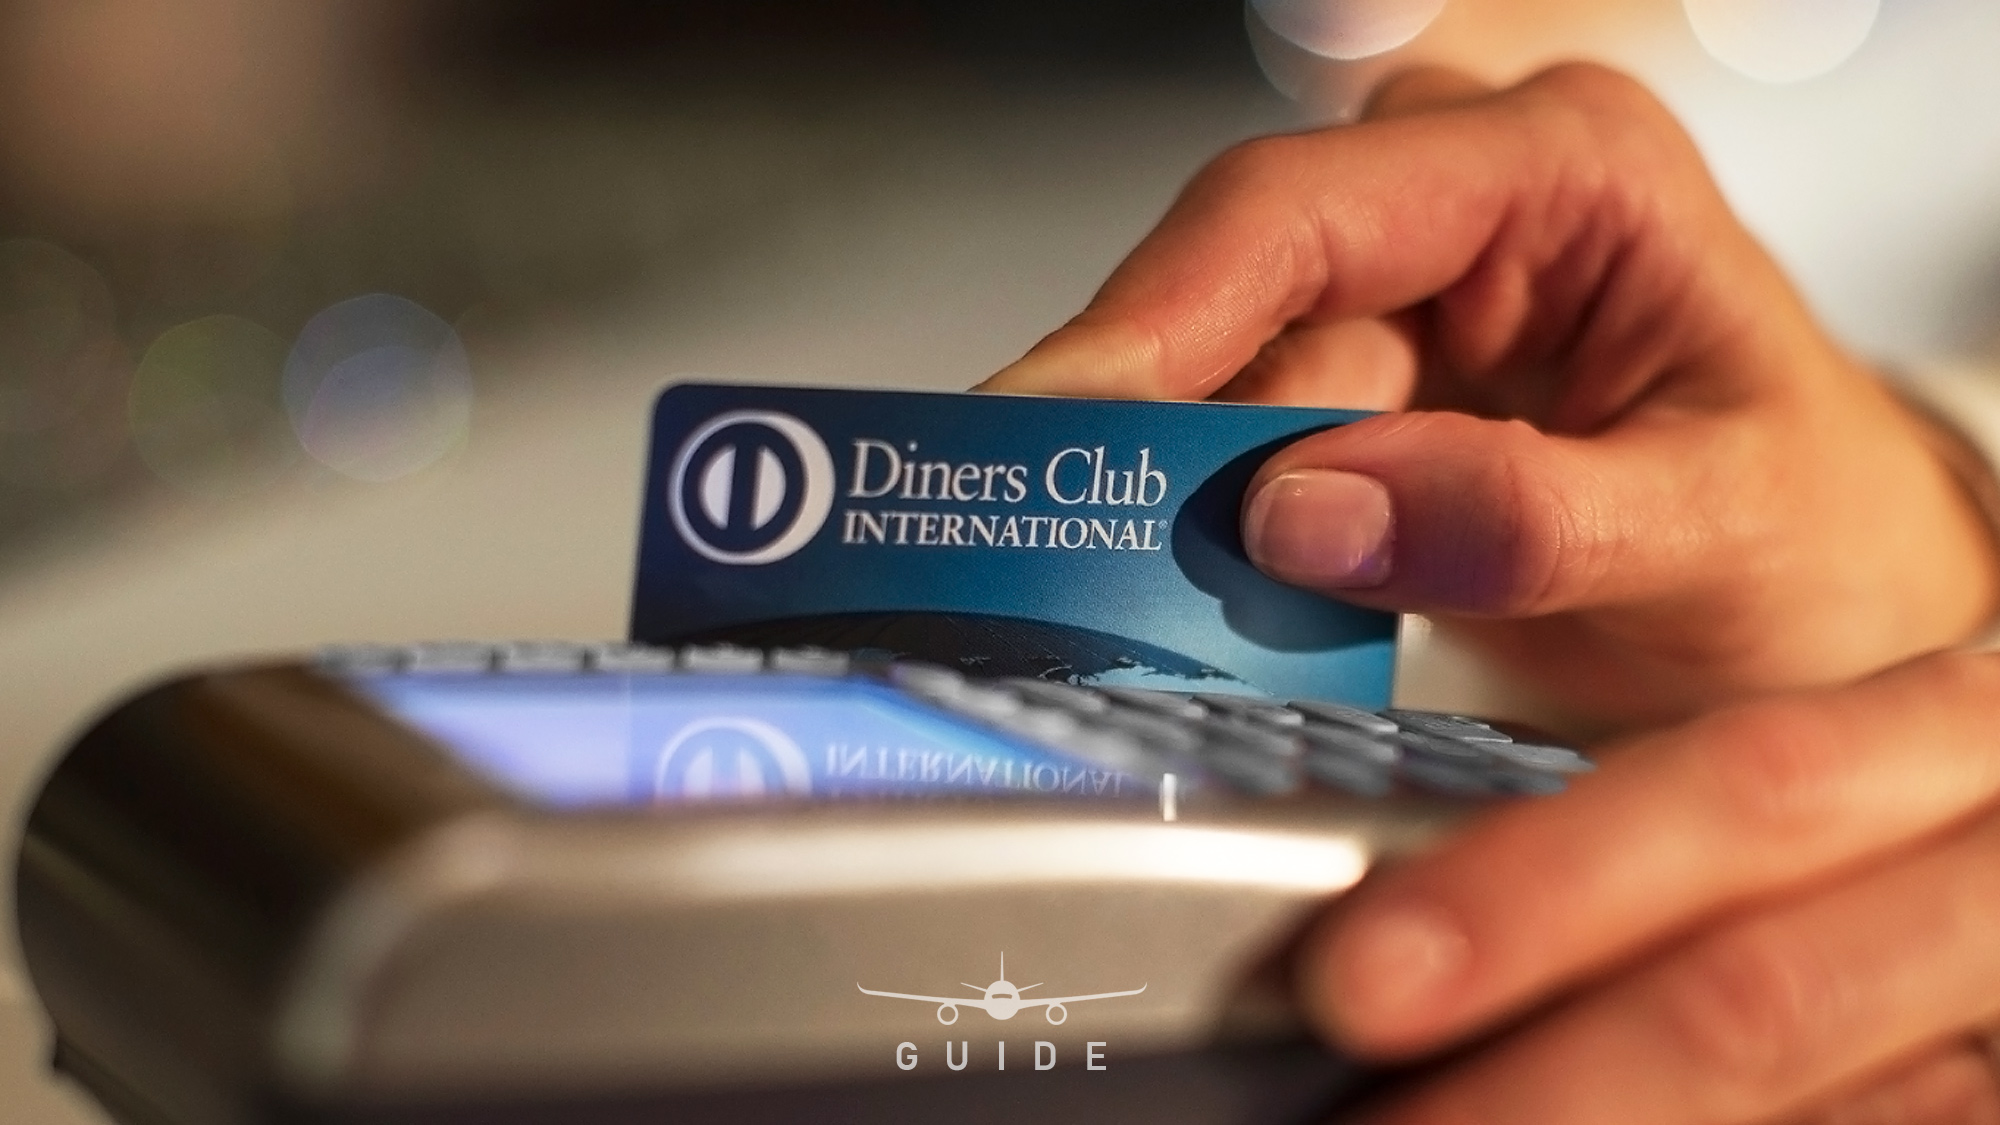 The ultimate guide to Diners Club cards for individuals - Point Hacks